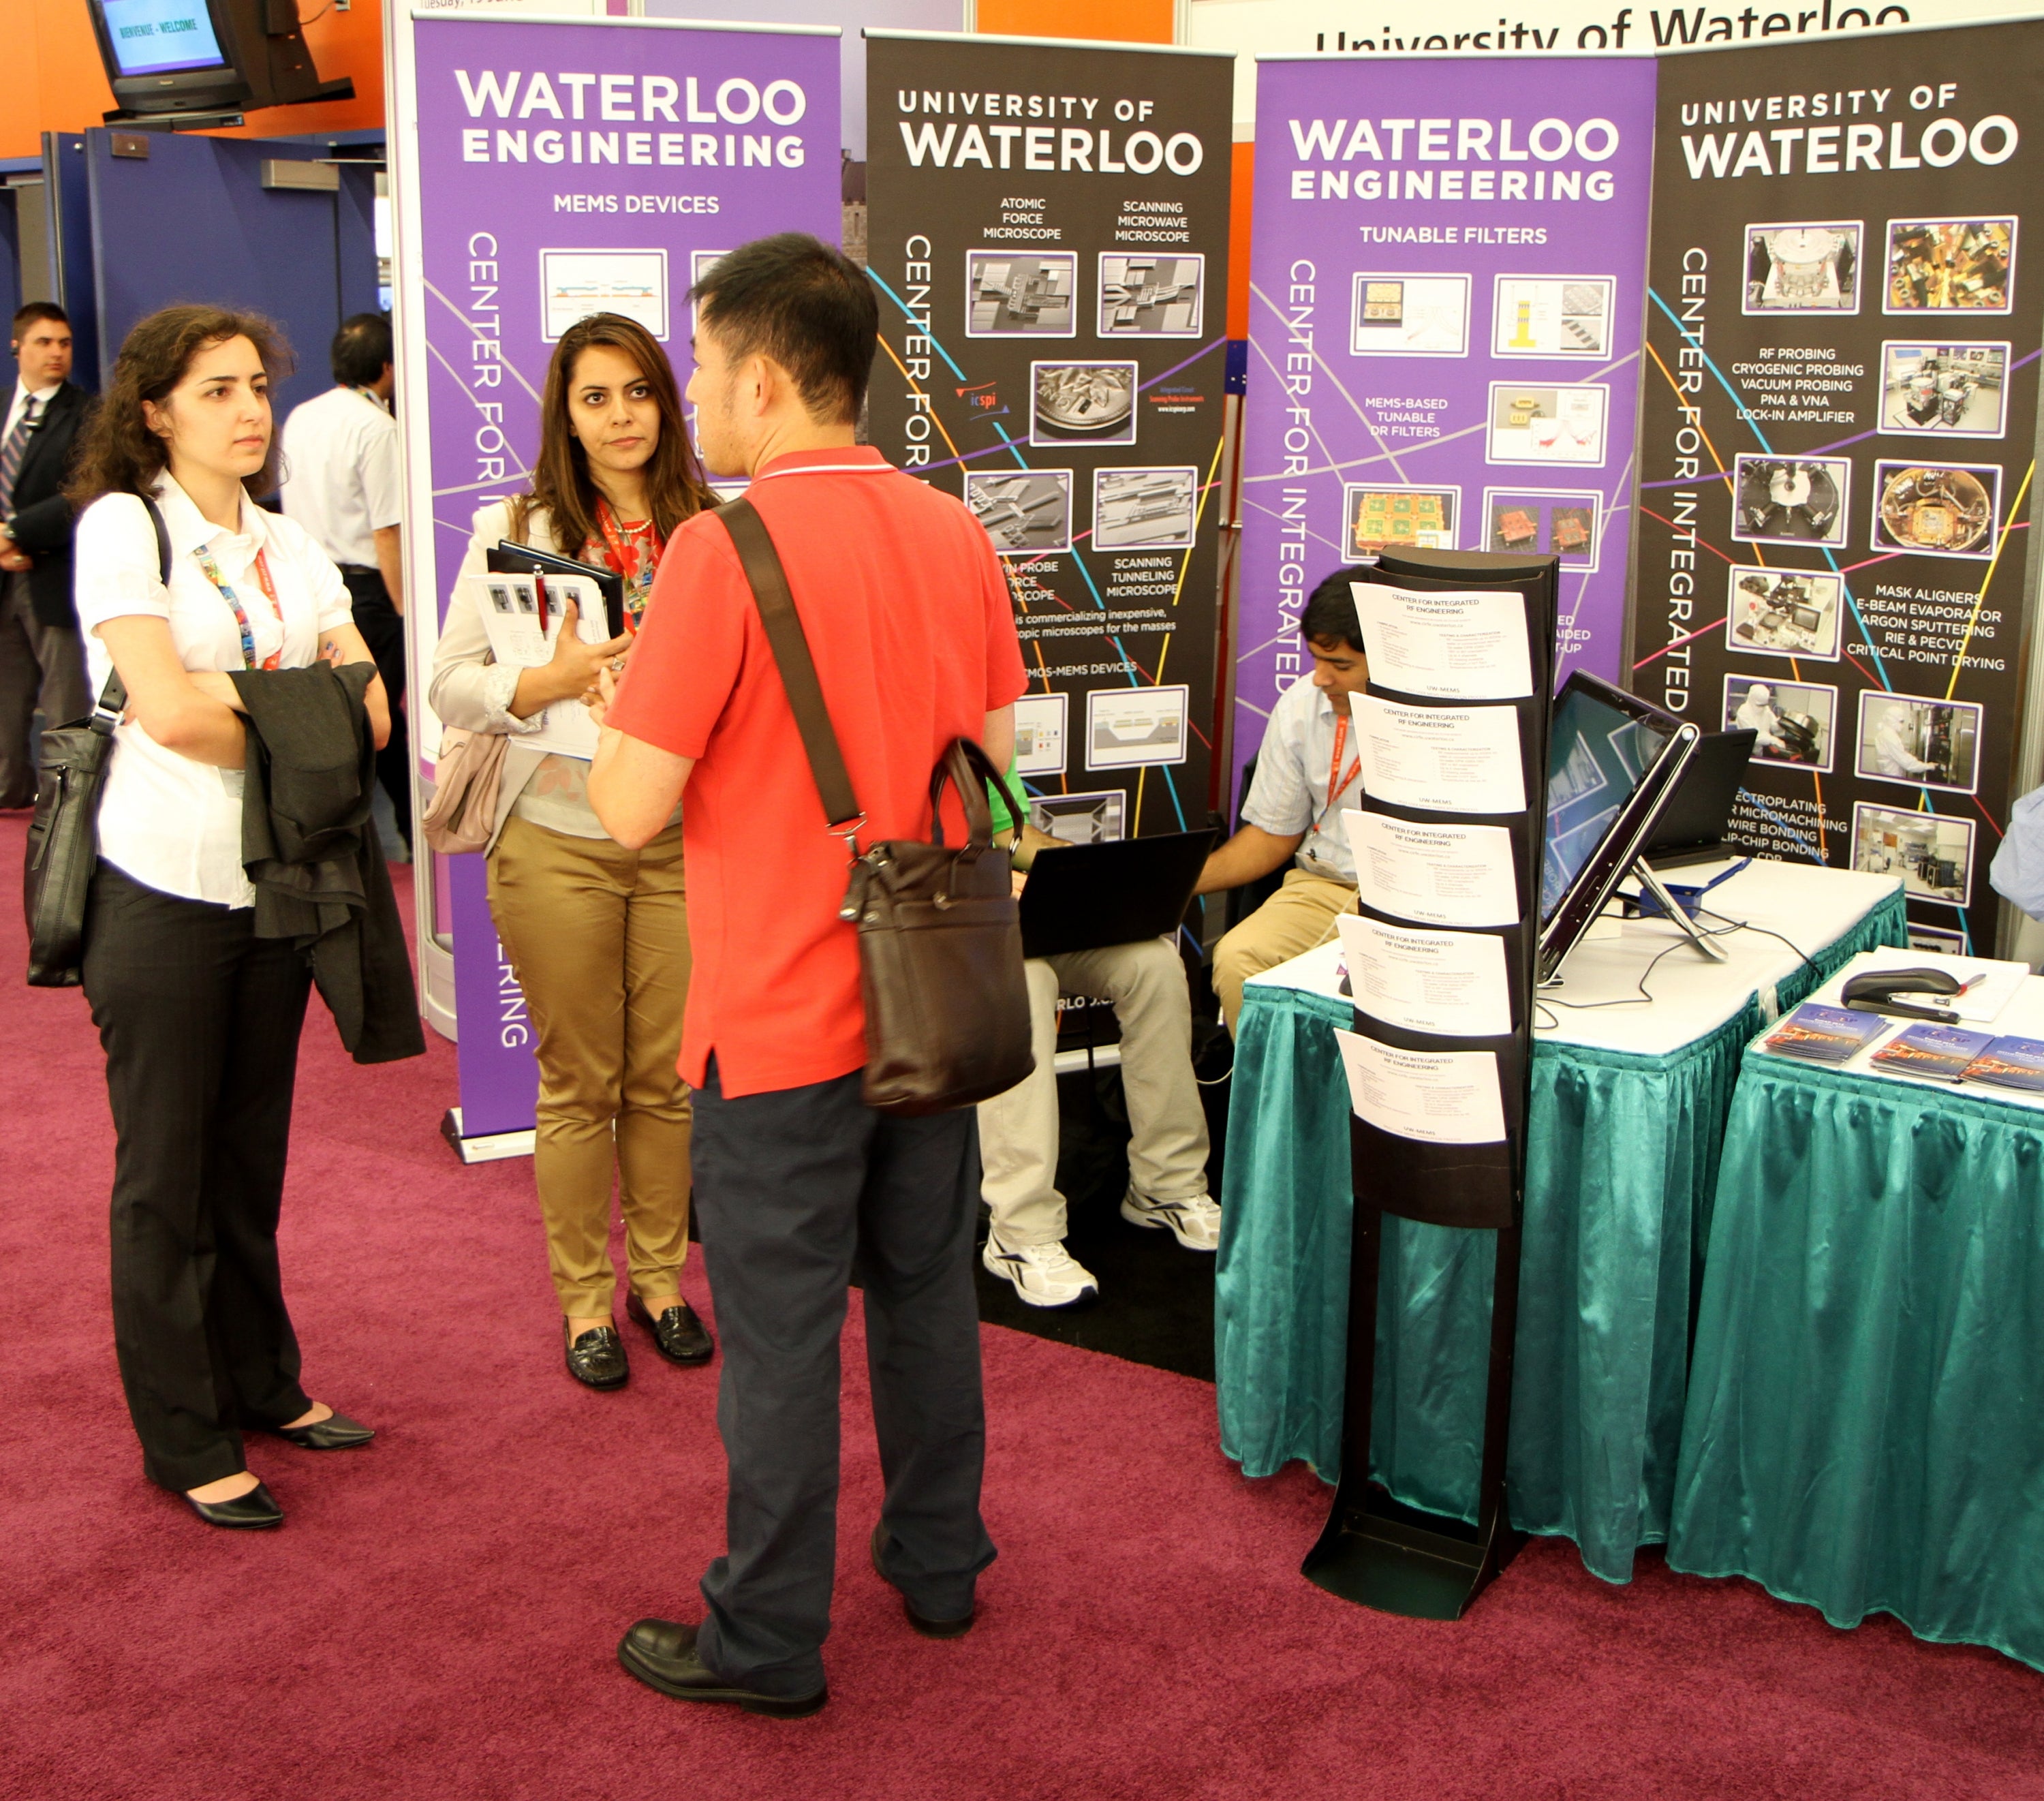 Students talking at booth